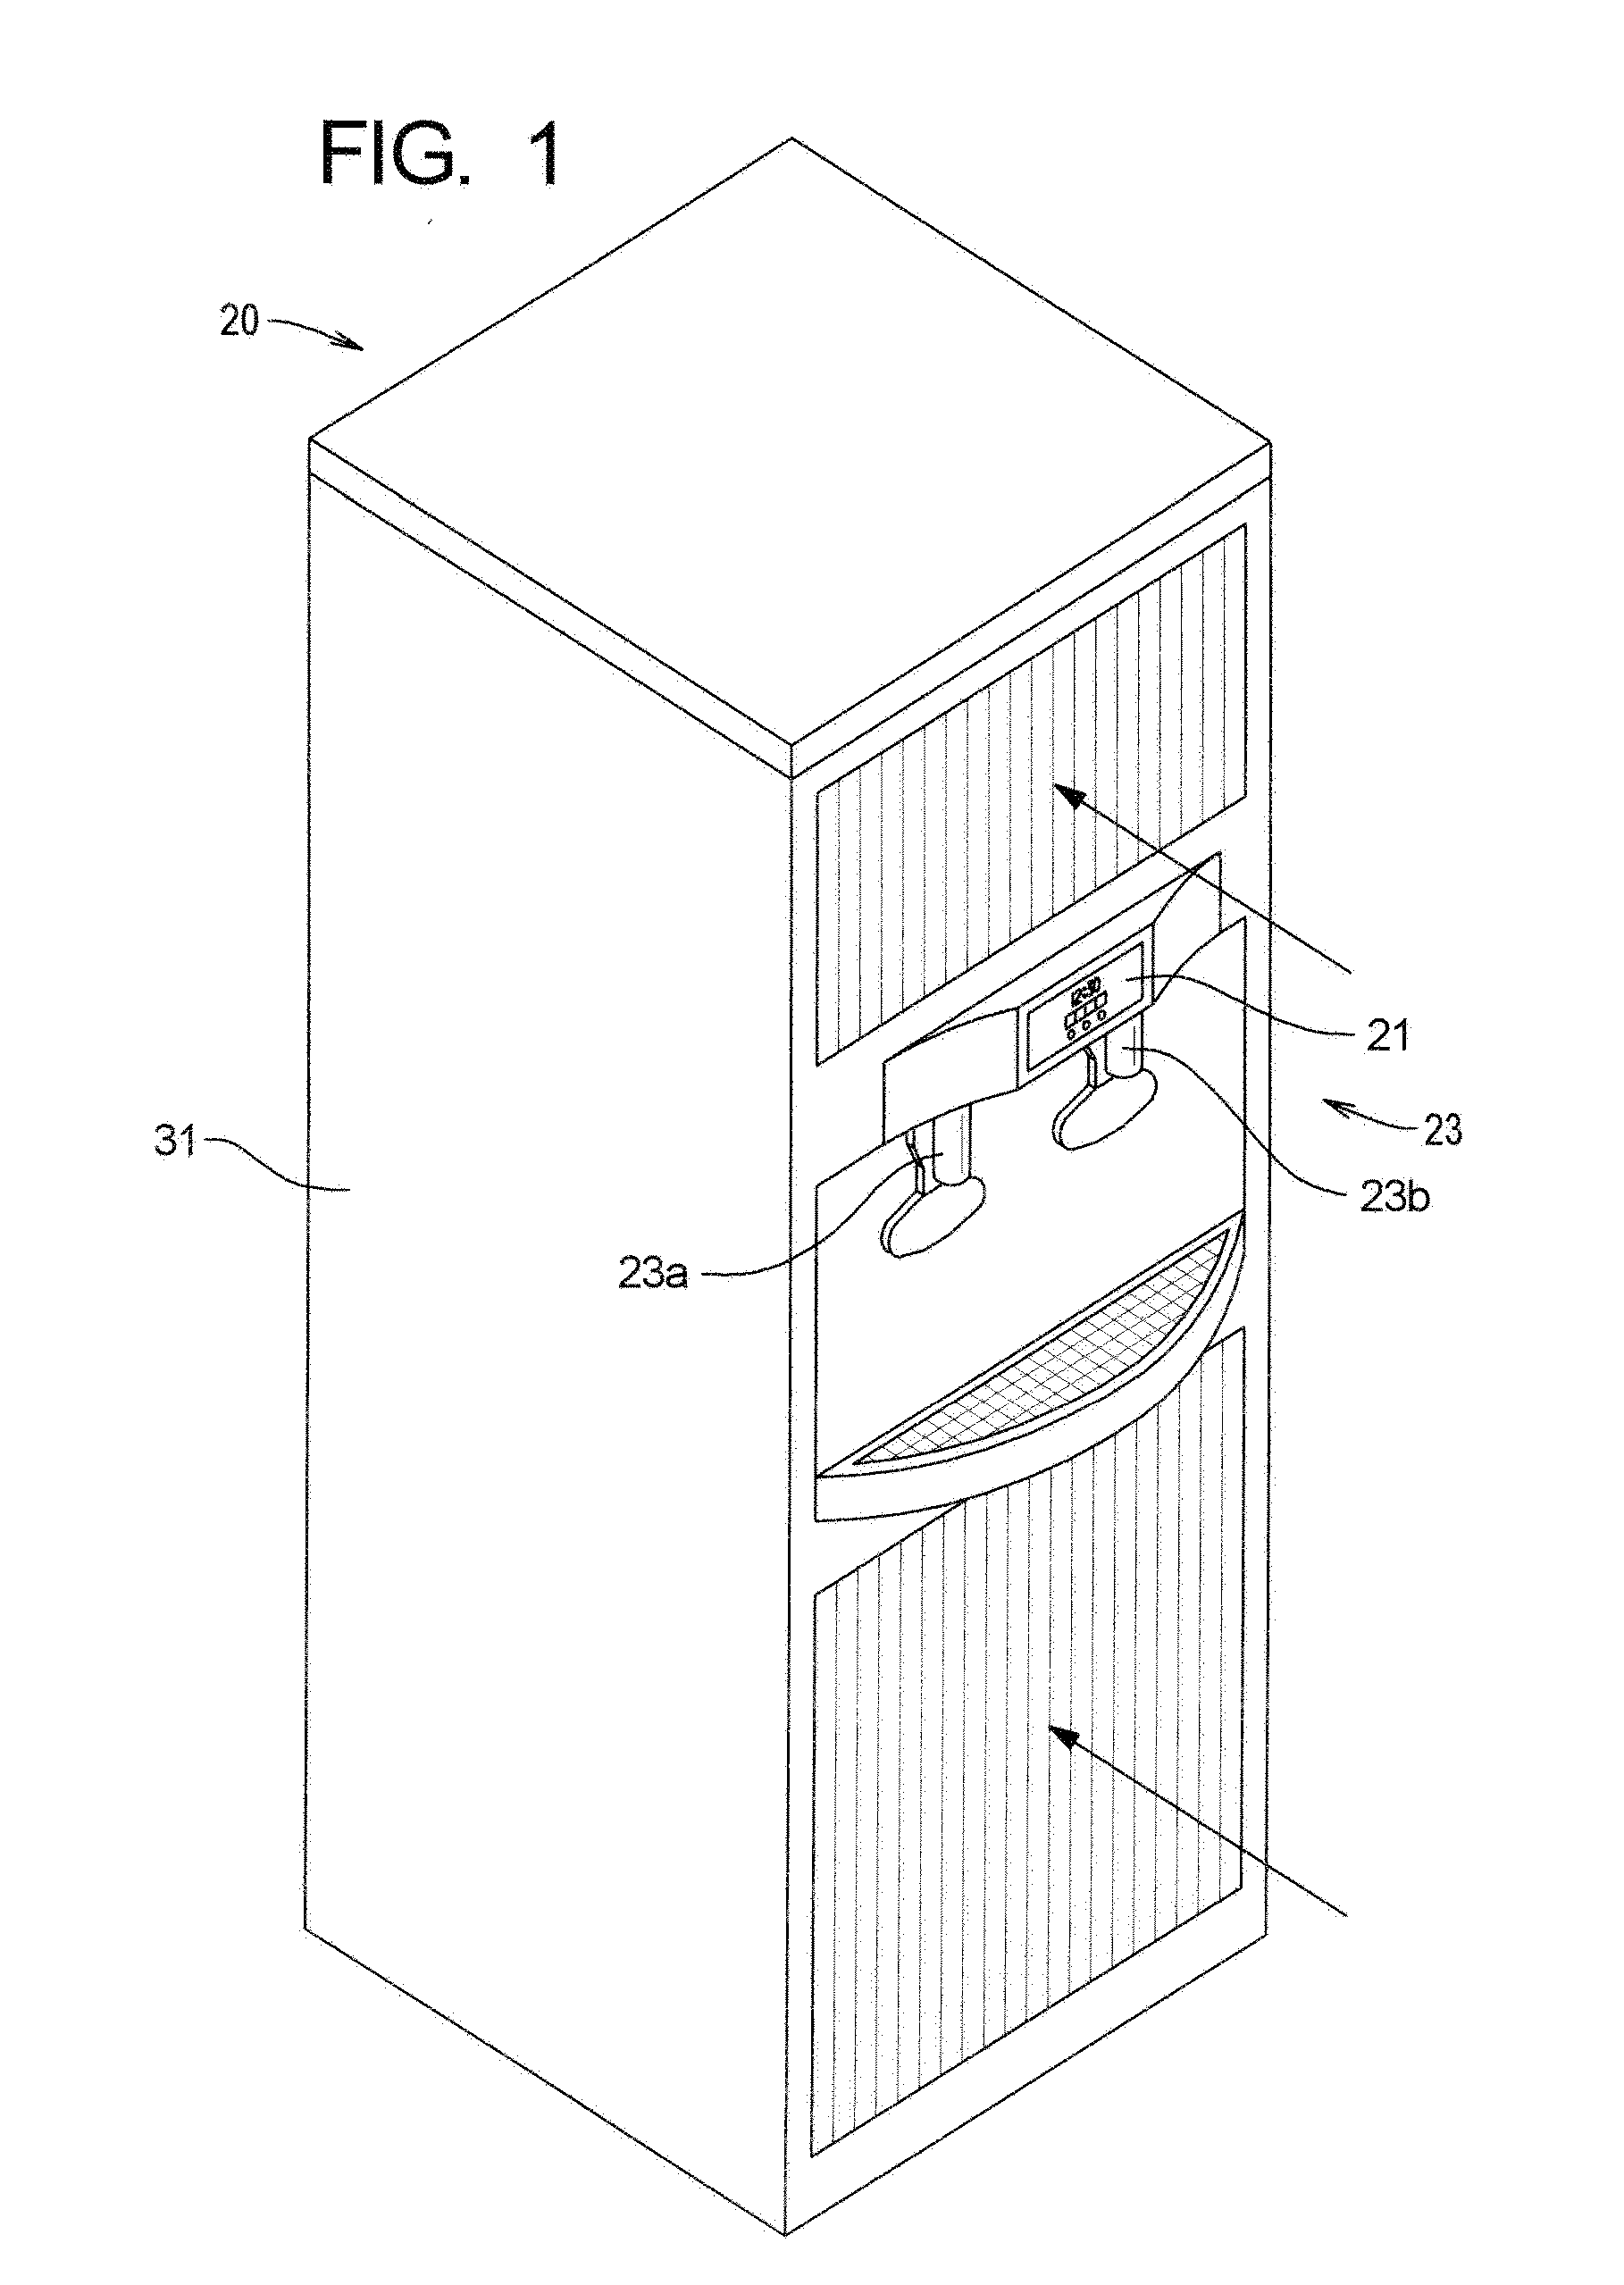 Water producing method and apparatus with additive control system